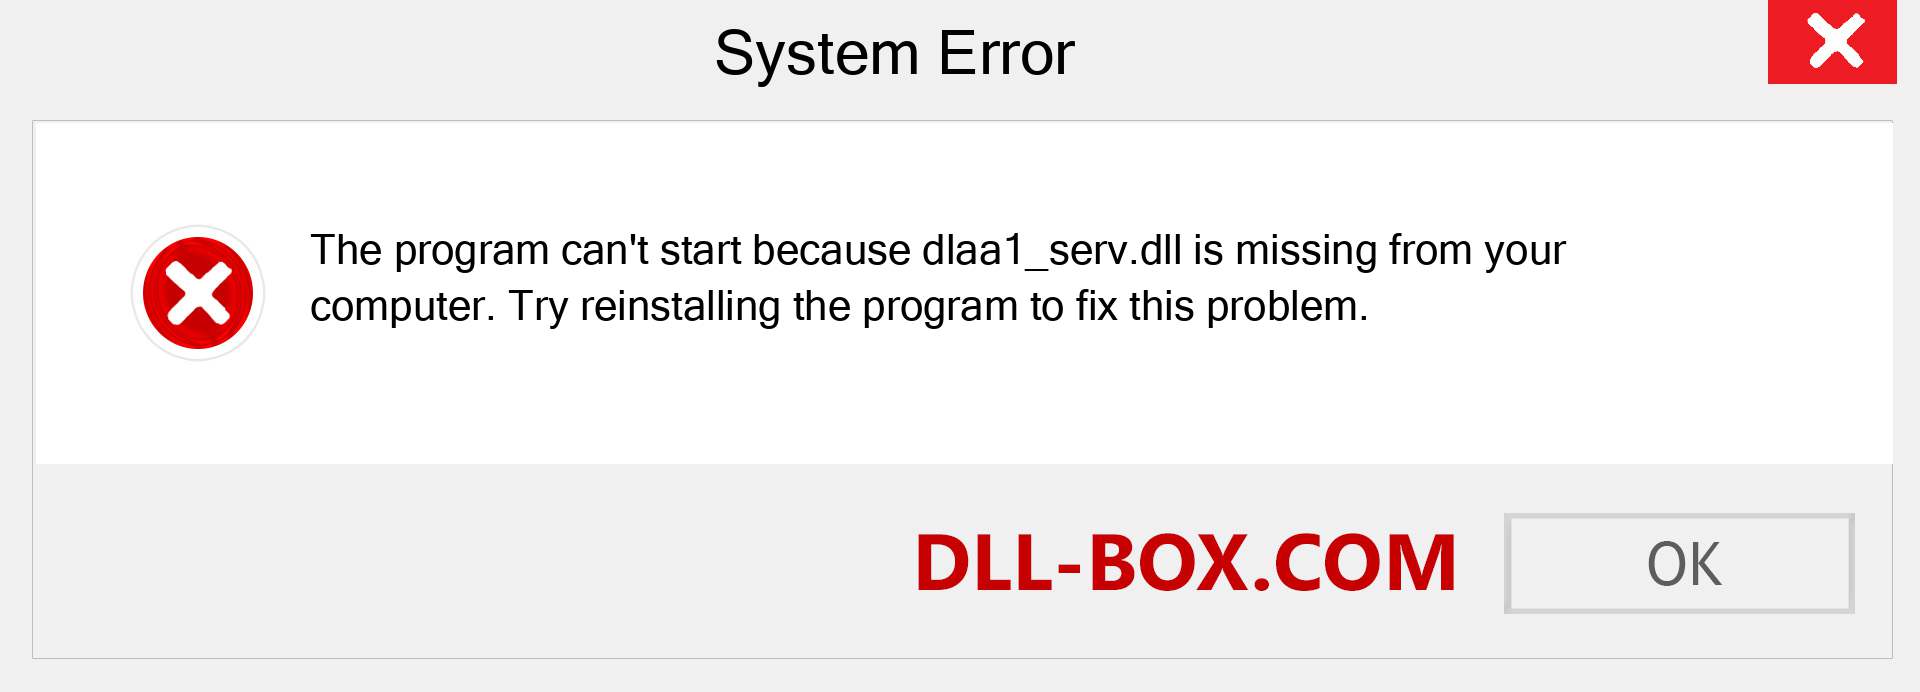  dlaa1_serv.dll file is missing?. Download for Windows 7, 8, 10 - Fix  dlaa1_serv dll Missing Error on Windows, photos, images